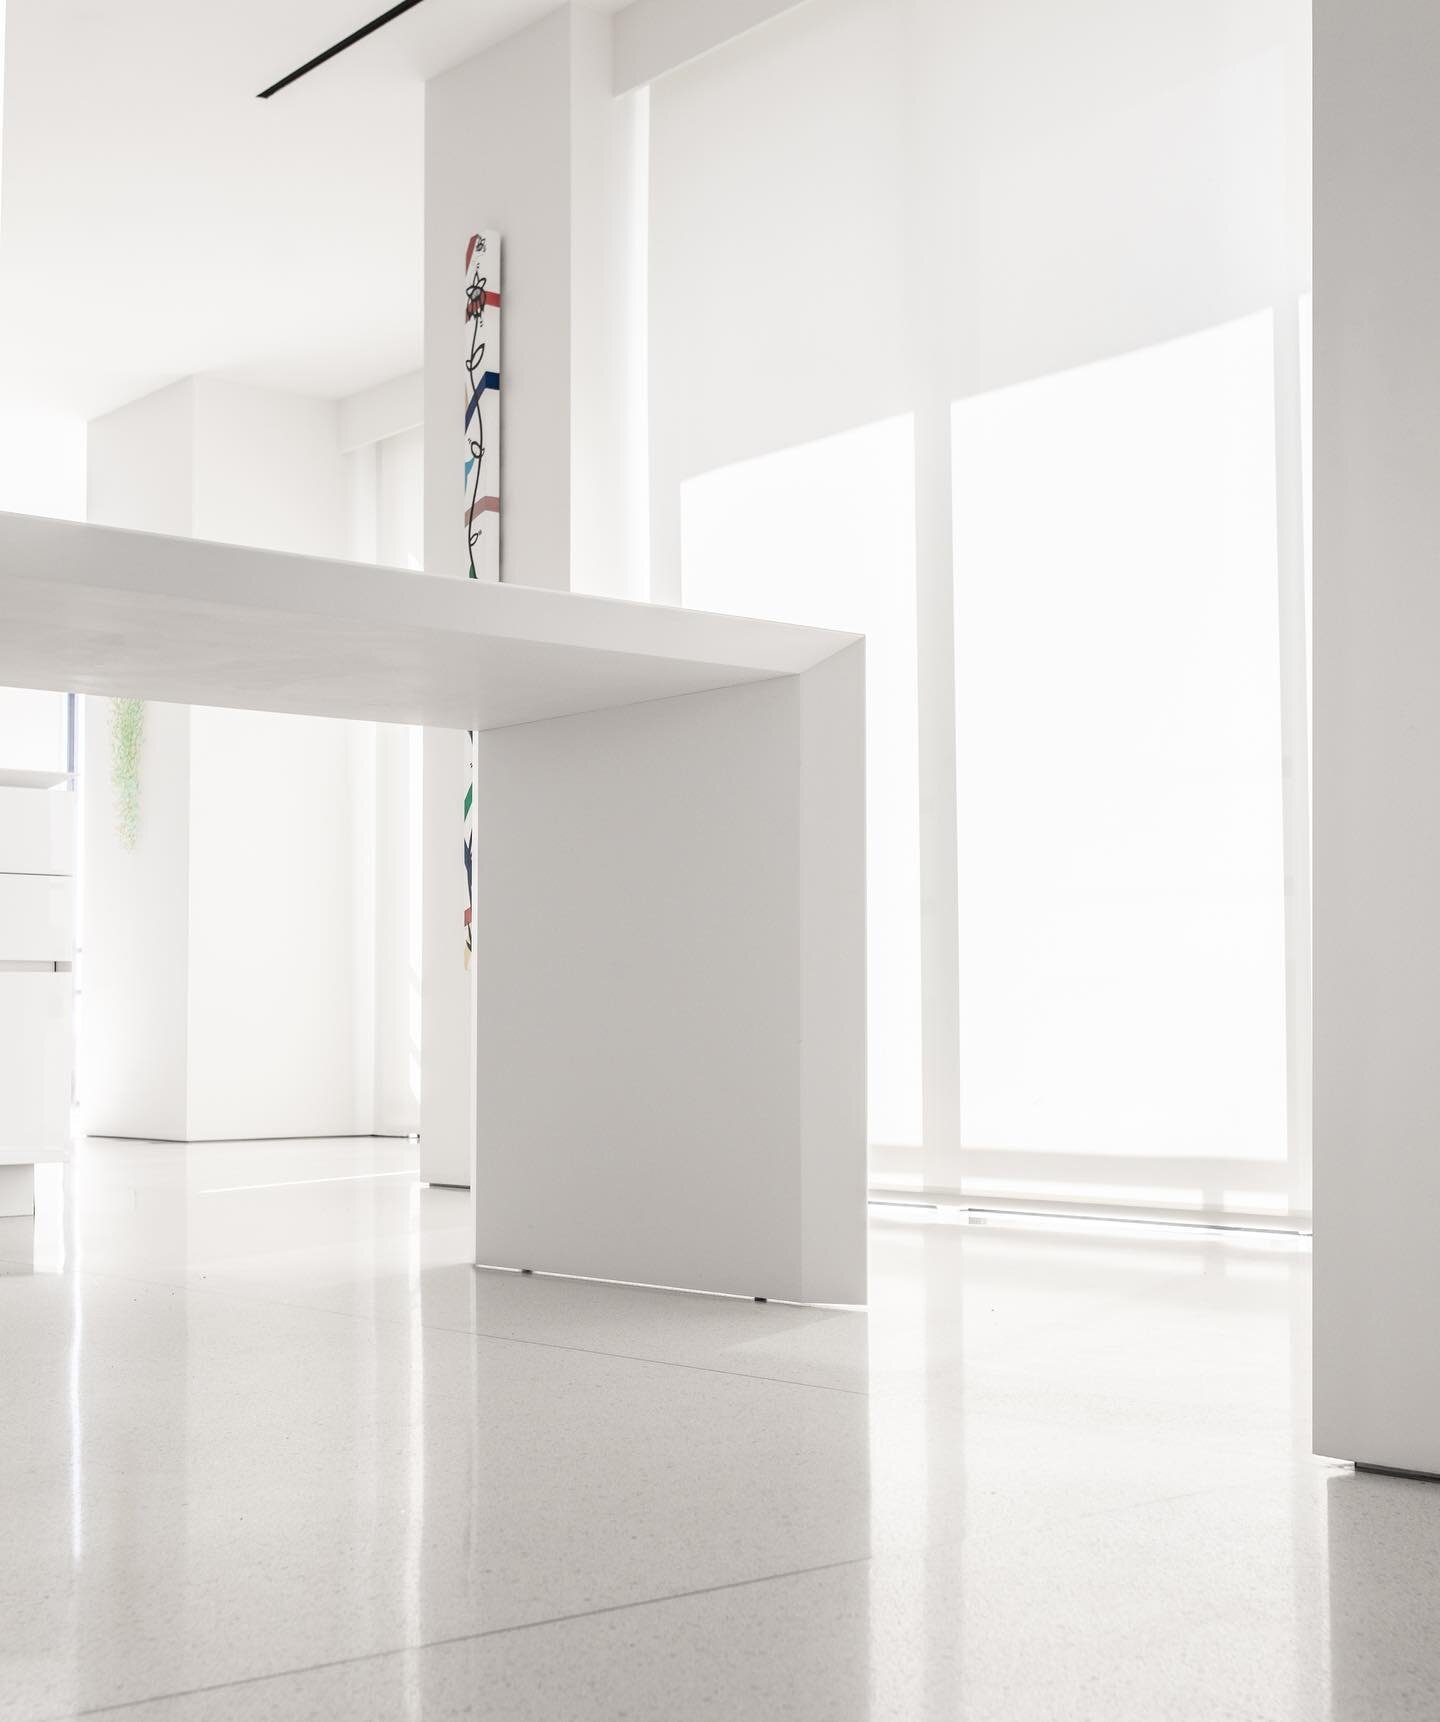 Our White Out penthouse project. On this one, our team @modaainc pulled all the stops. It appears that everything looks so simple, elegant, and clean.  But, underneath this minimalist expression lies a myriad of MEP systems. In order to build this op